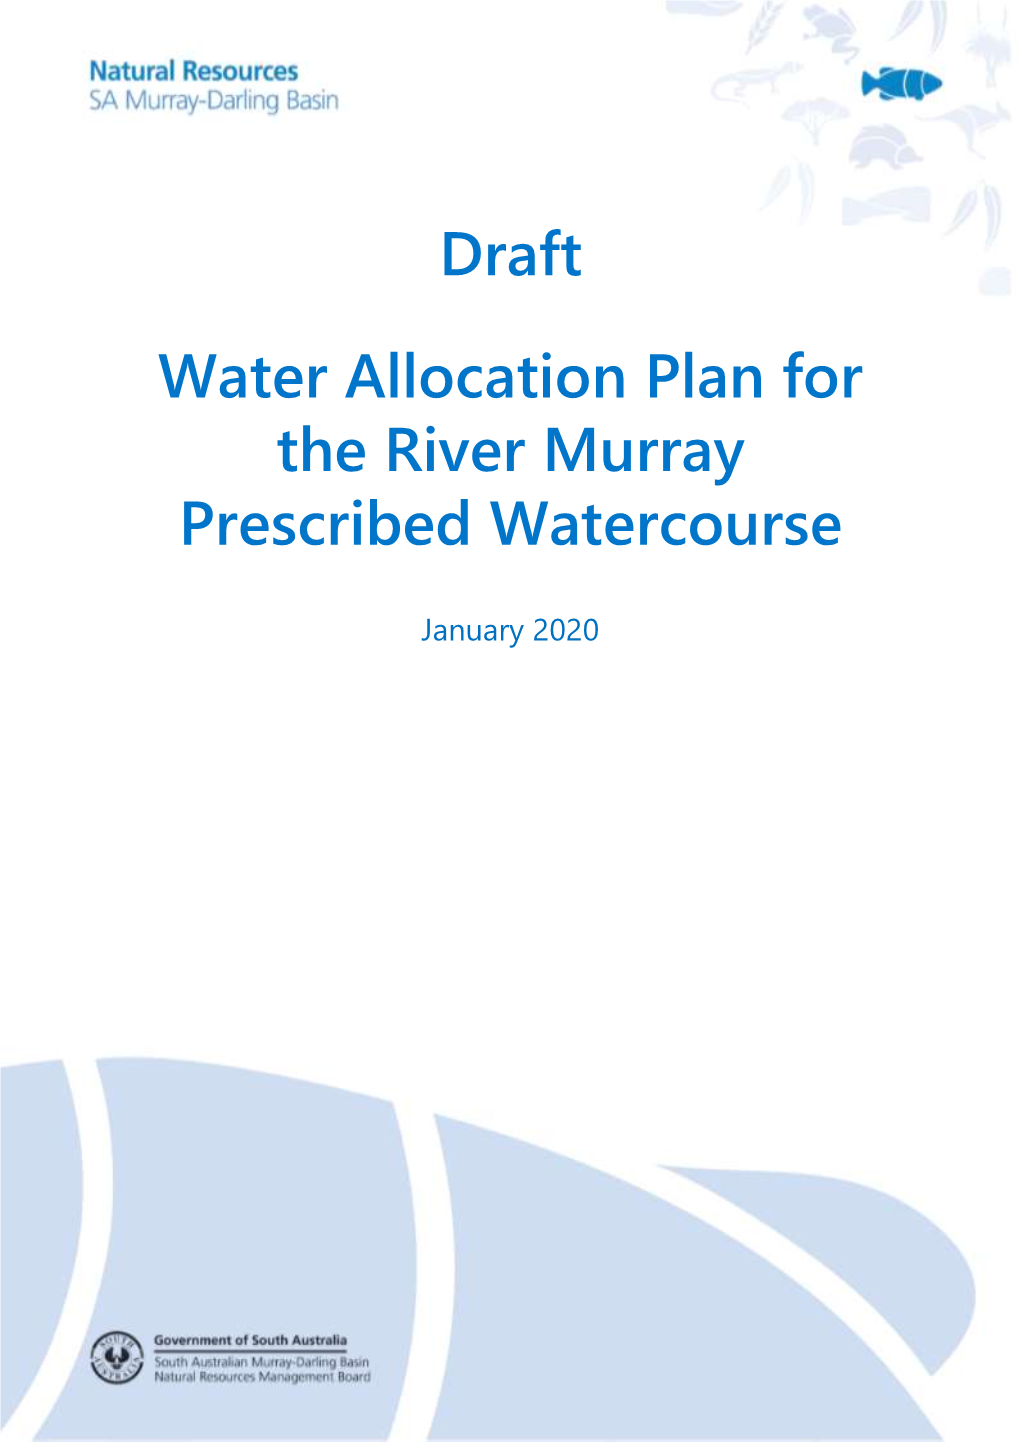 Draft Water Allocation Plan for the River Murray Prescribed Watercourse